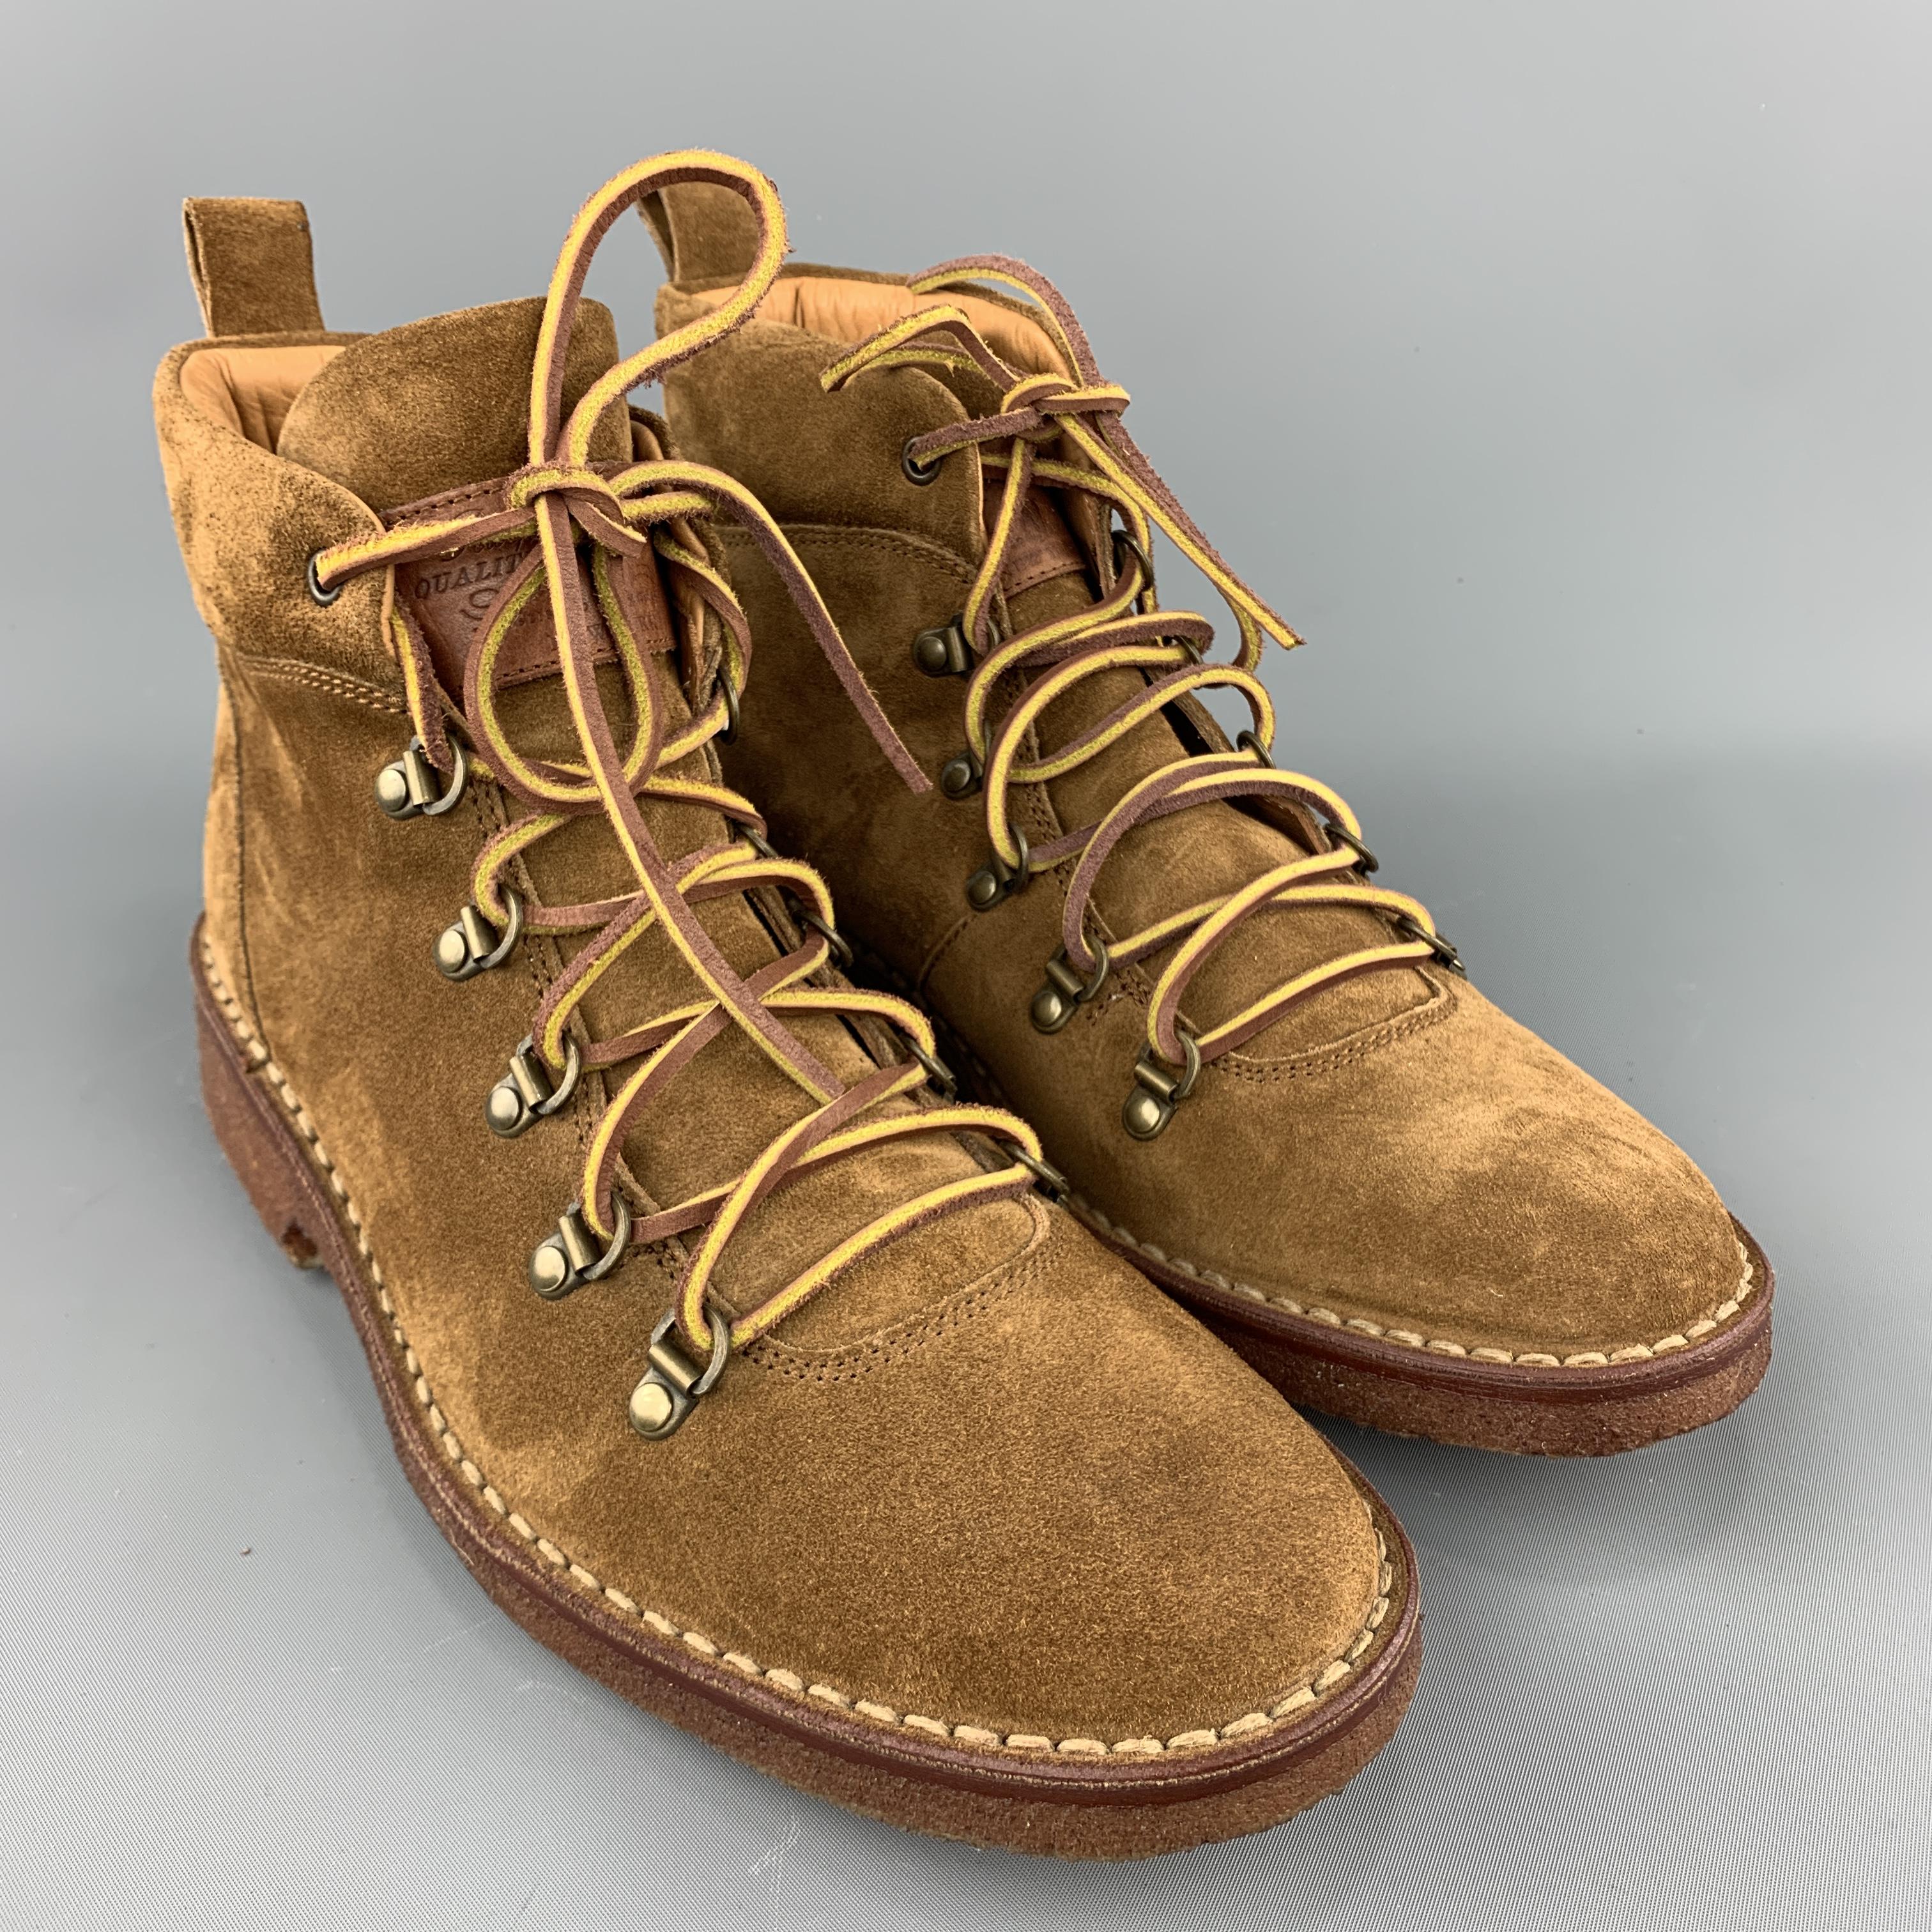 RALPH LAUREN boots come in tan brown suede with ski hook lace up front and crepe sole. With box. Made in Italy.
 
Excellent Pre-Owned Condition.
Marked: 8 D
 
Outsole: 11.5 x 4.25 in.
Length: 4.5 in.